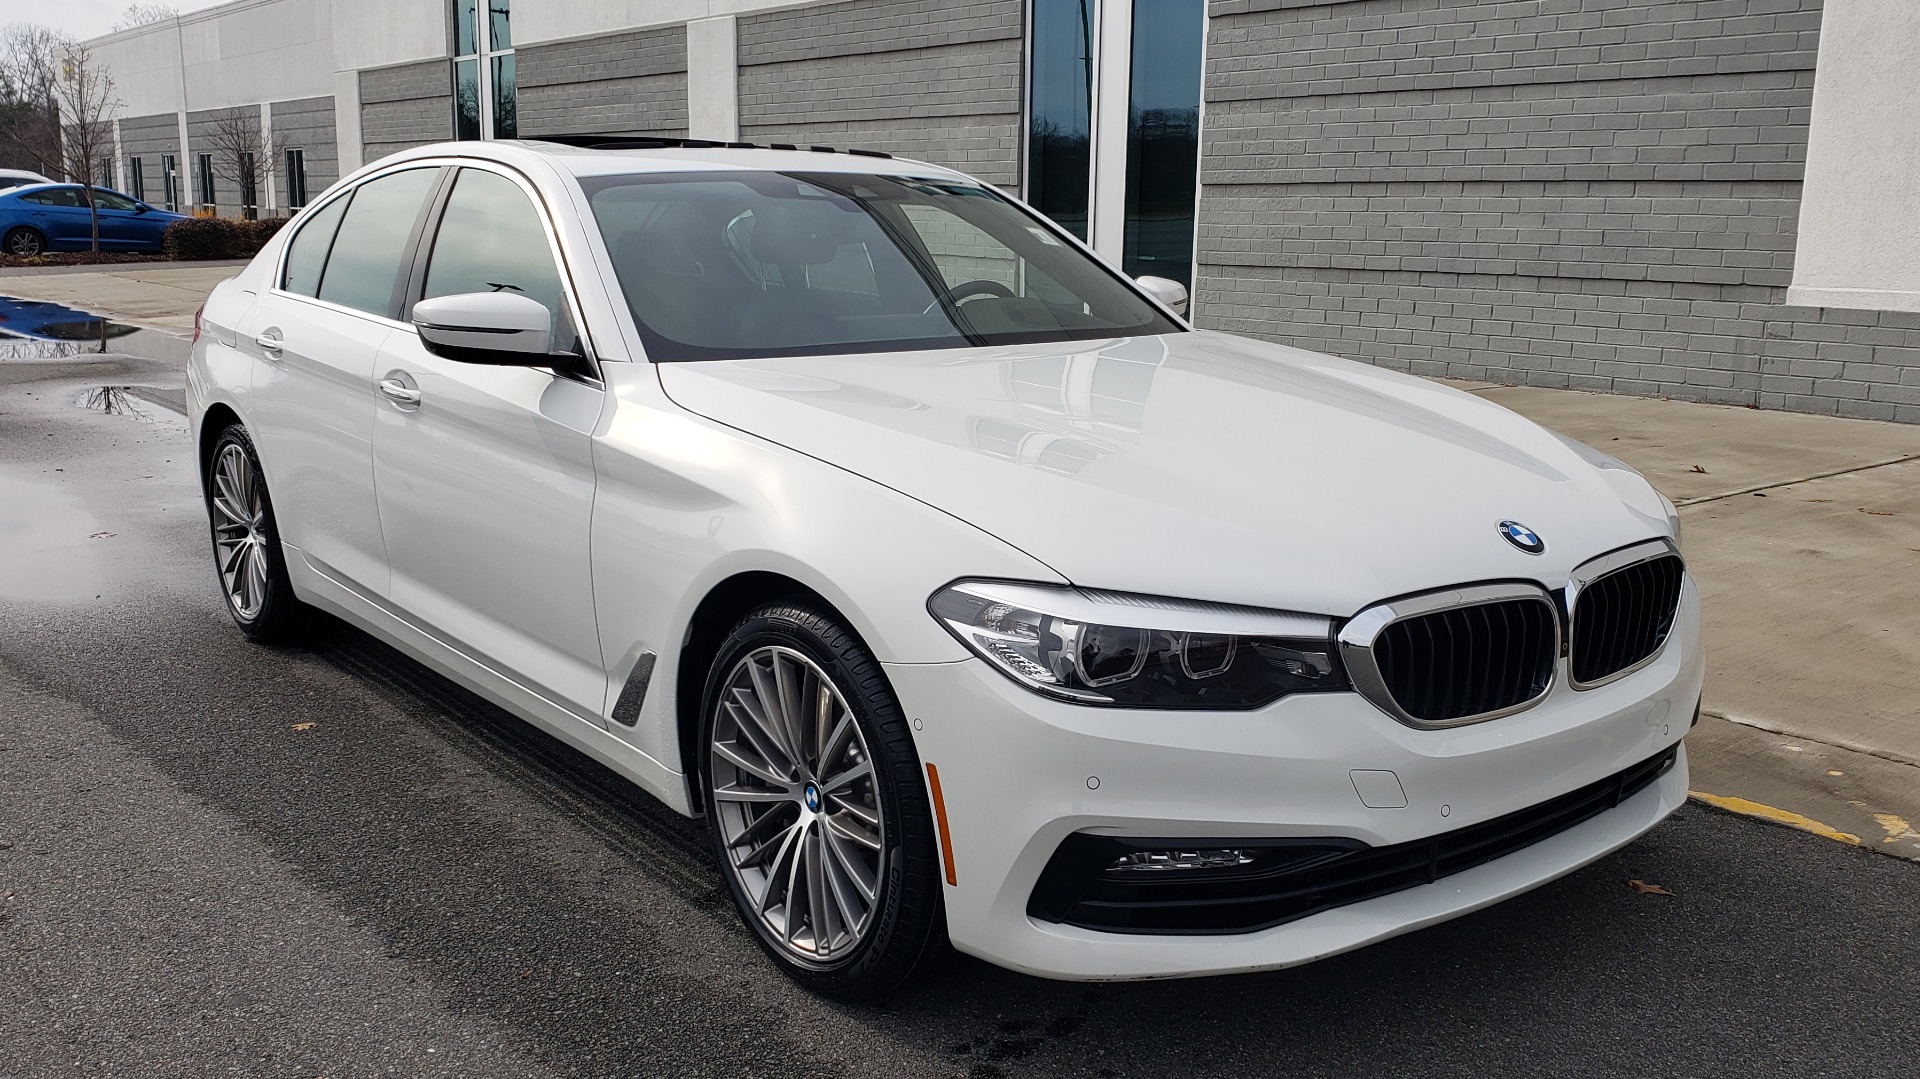 Used 2017 BMW 5 SERIES 530I PREMIUM / DRVR ASST PLUS / NAV / HUD / SUNROOF / REARVIEW for sale Sold at Formula Imports in Charlotte NC 28227 2